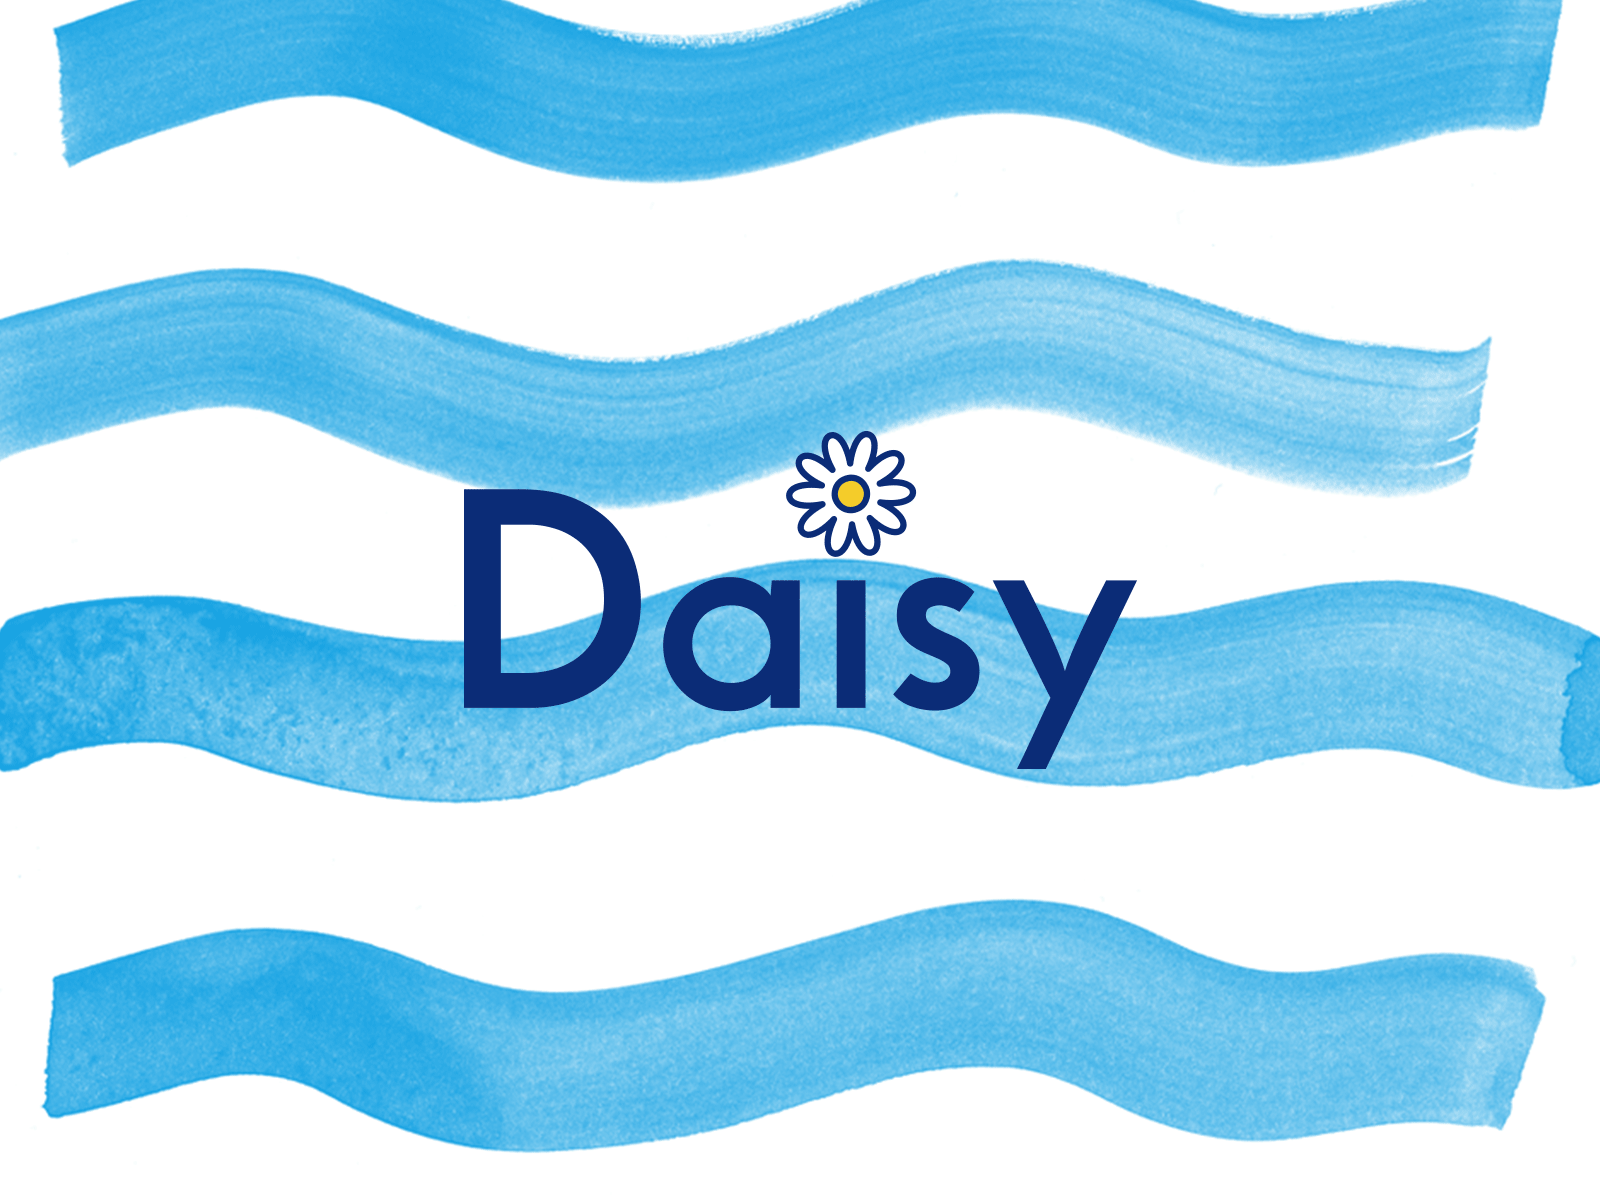 Daisy branding and packaging design abstract pattern branding branding concept graphic design illustration logo painting pattern design visual identity